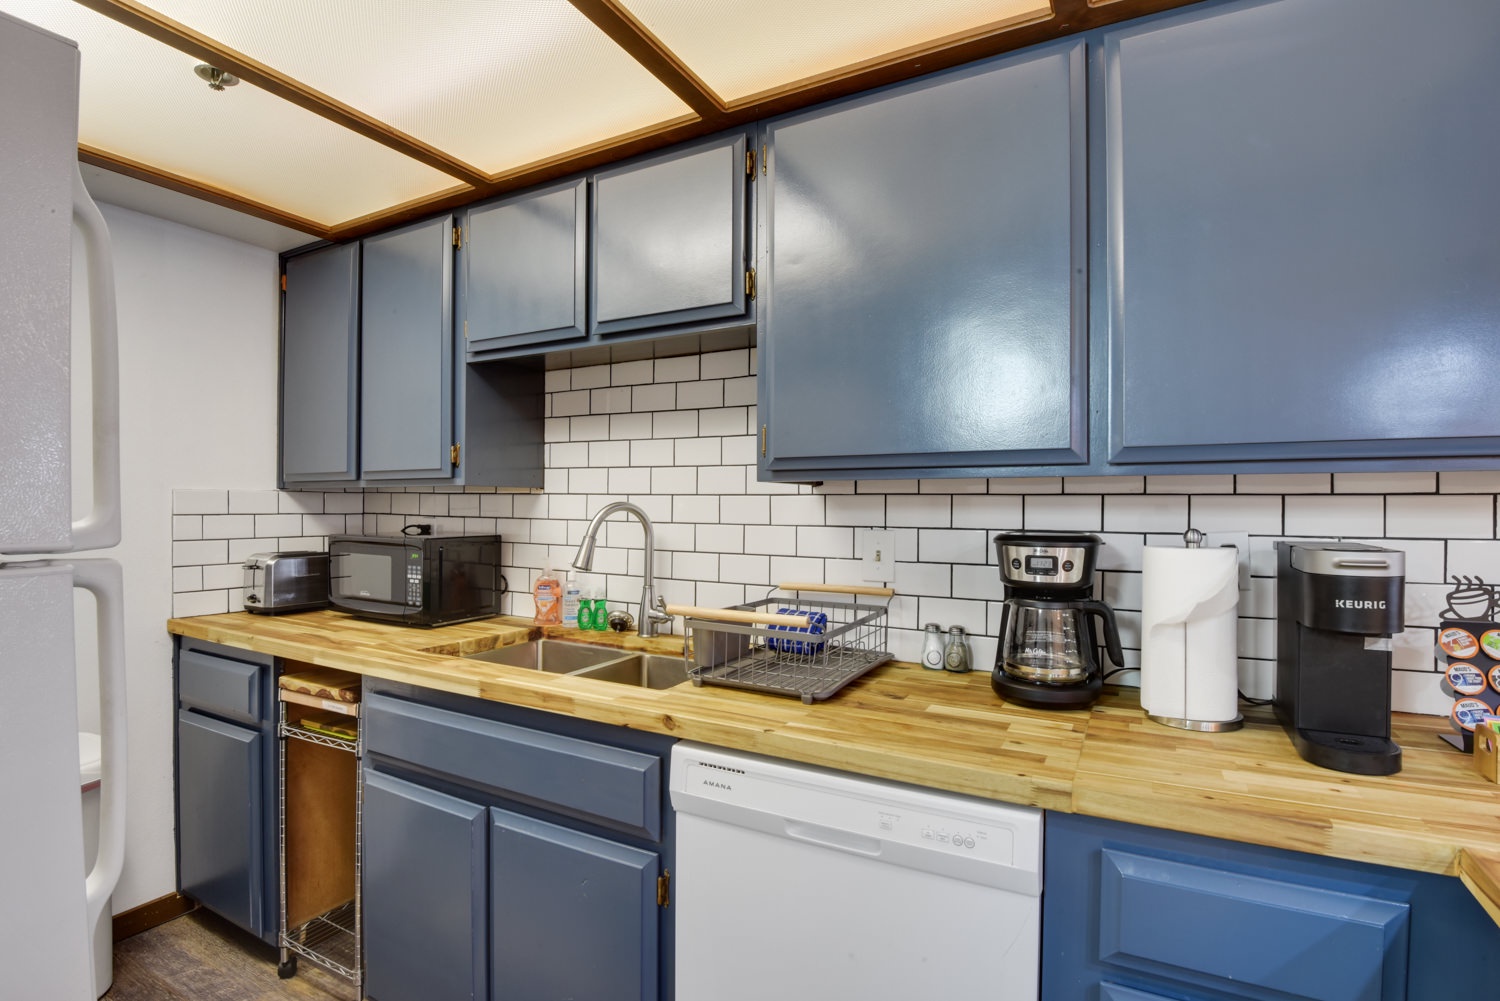 Kitchen features coffee pot and toaster